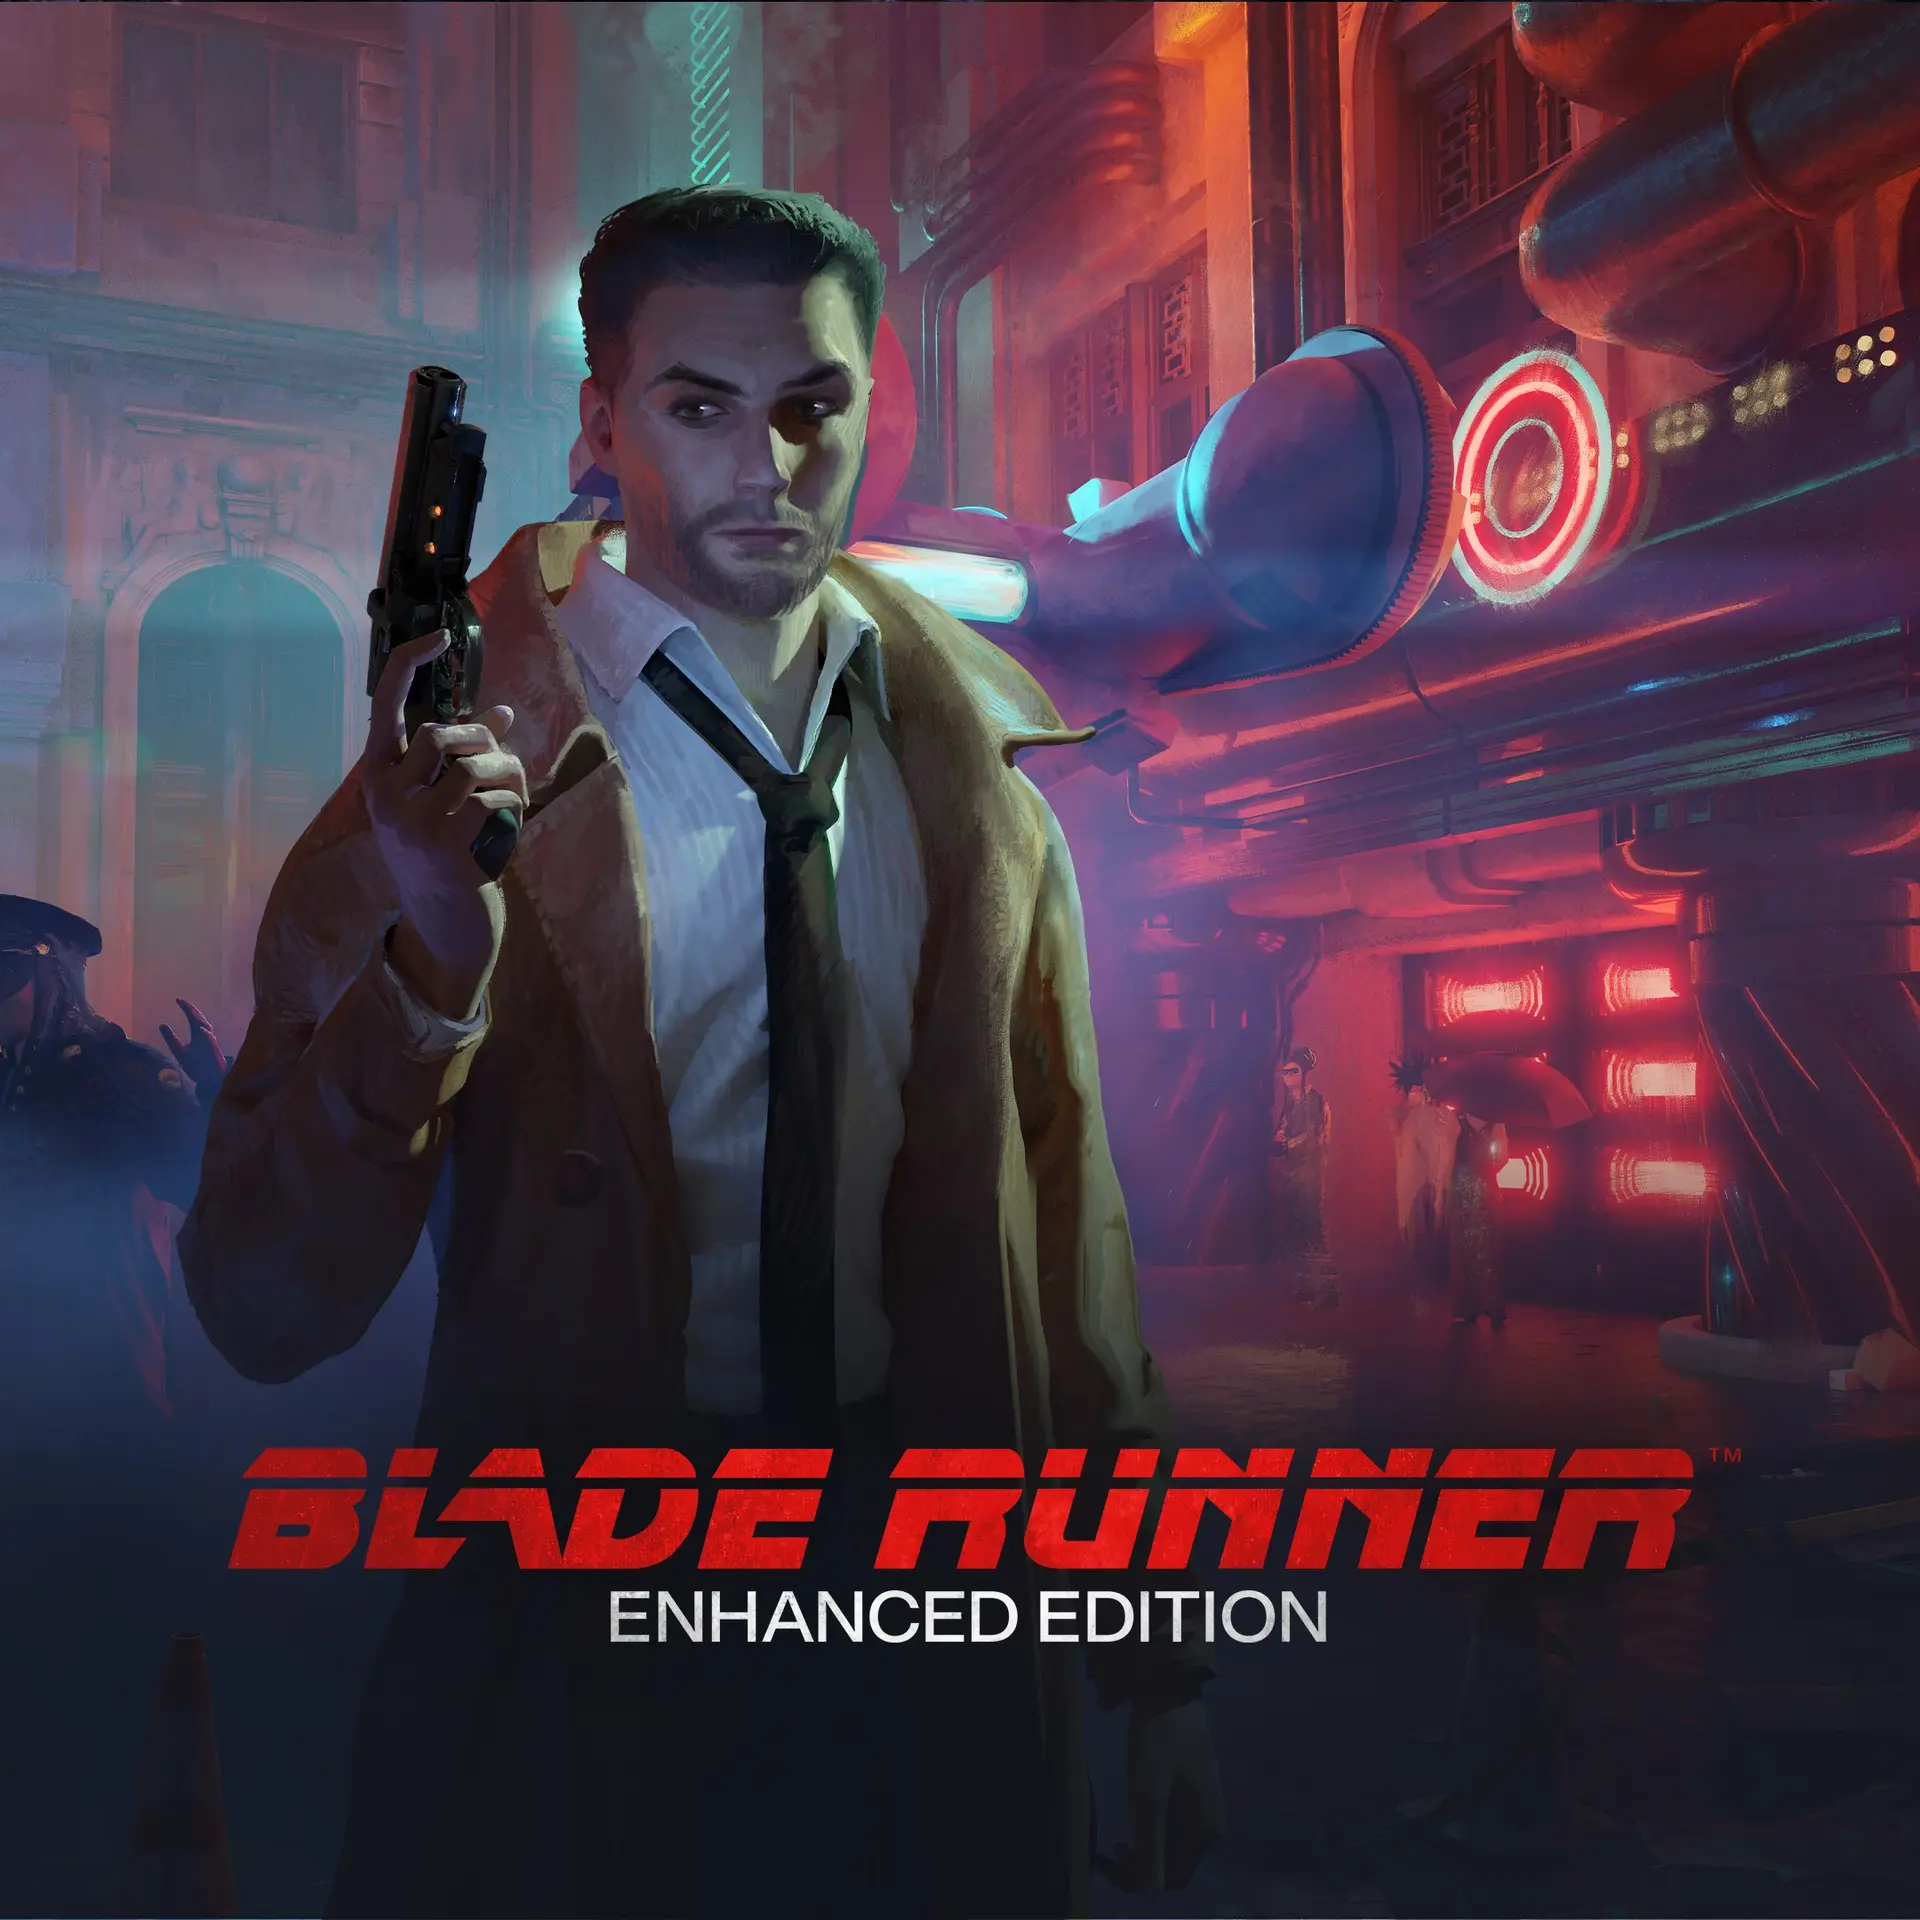 Blade Runner Enhanced Edition (XBOX One - Cheapest Store)